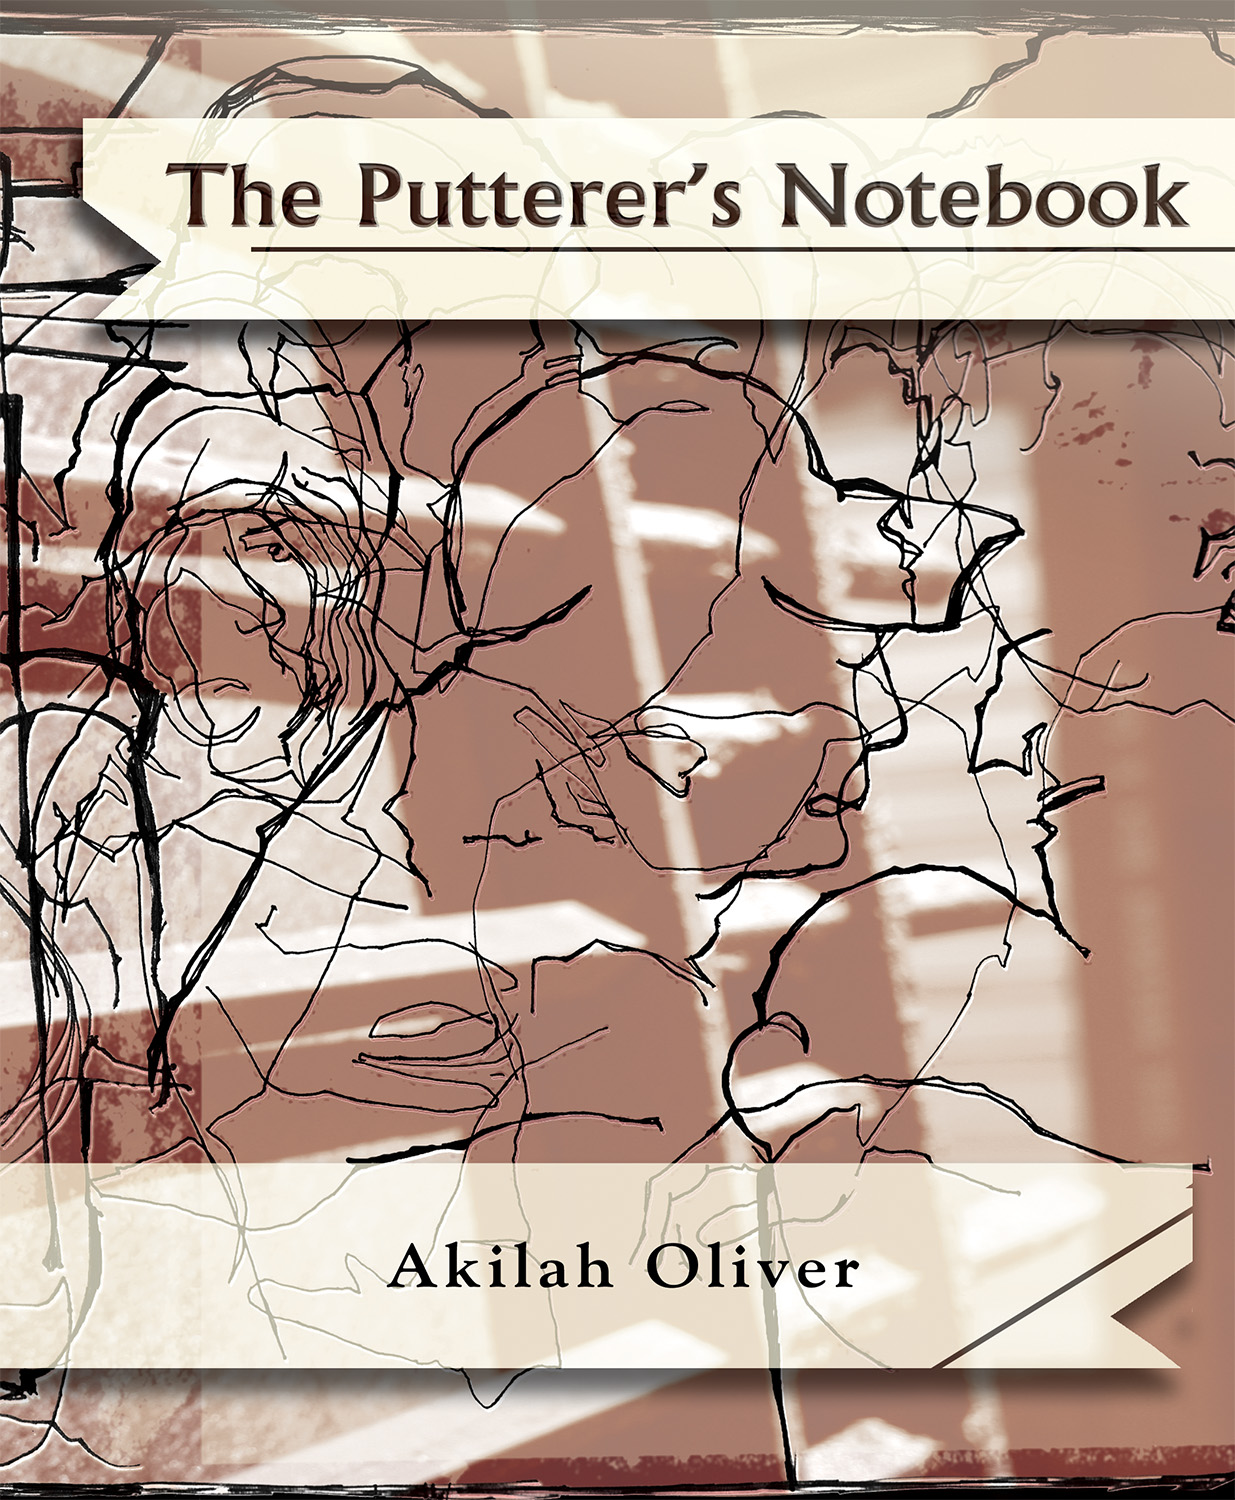 cover of Akilah Oliver's book The Putterers Notebook